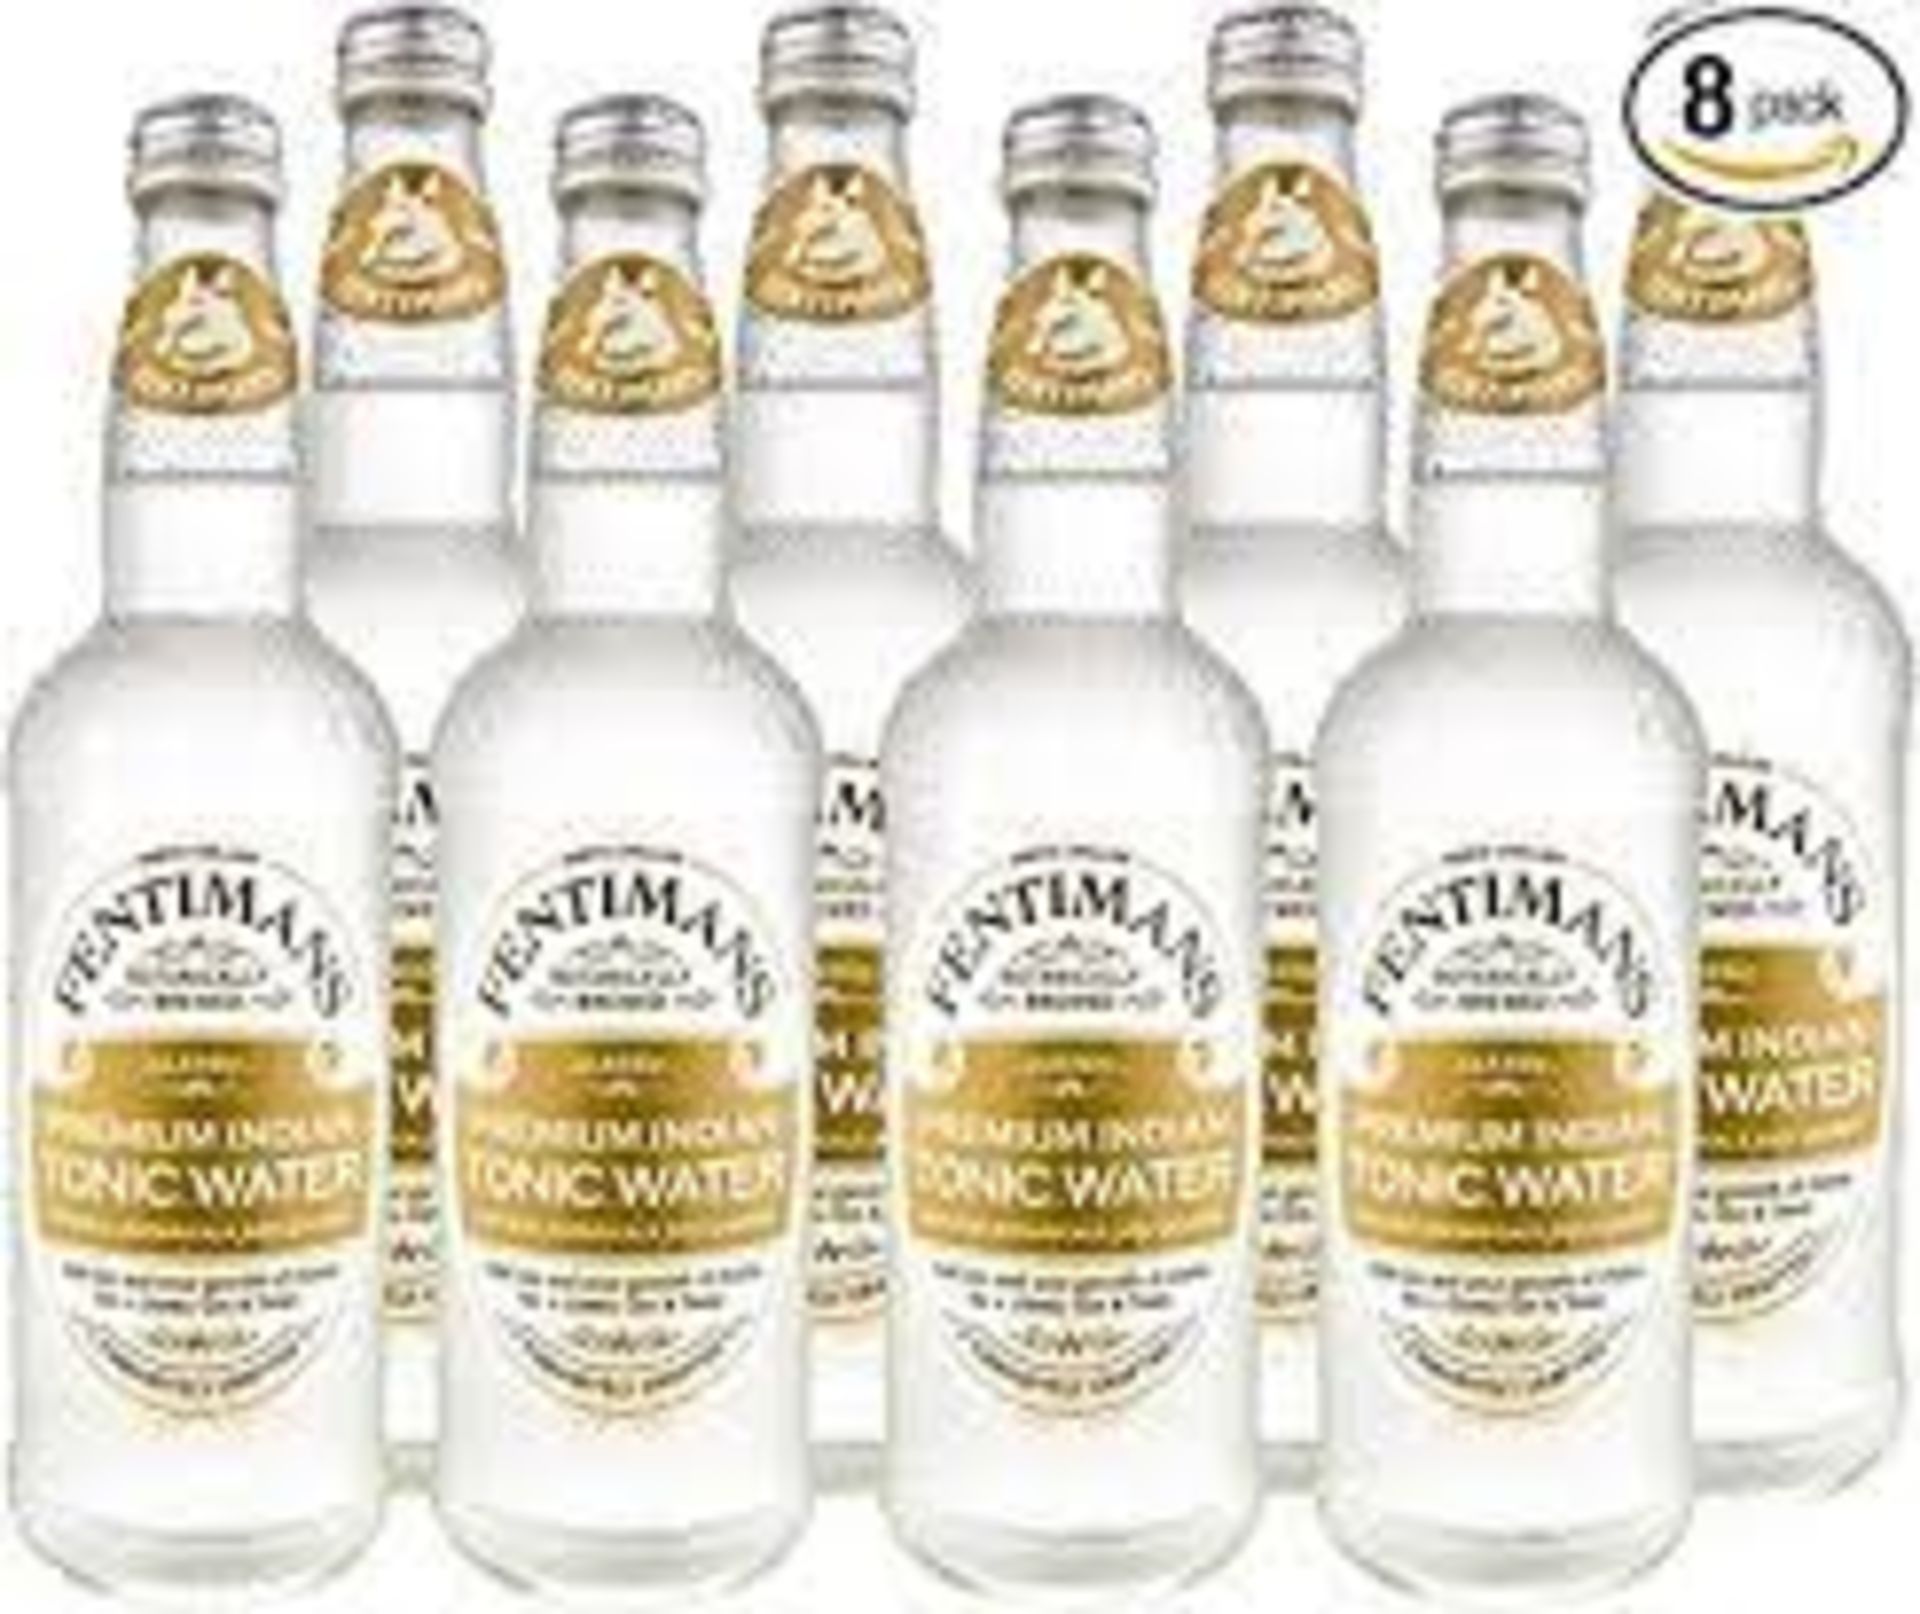 RRP £596 (Approx. Count 45) (A29) spSBG21RKNs Fentimans Premium Indian Tonic Water, 8 x 500ml